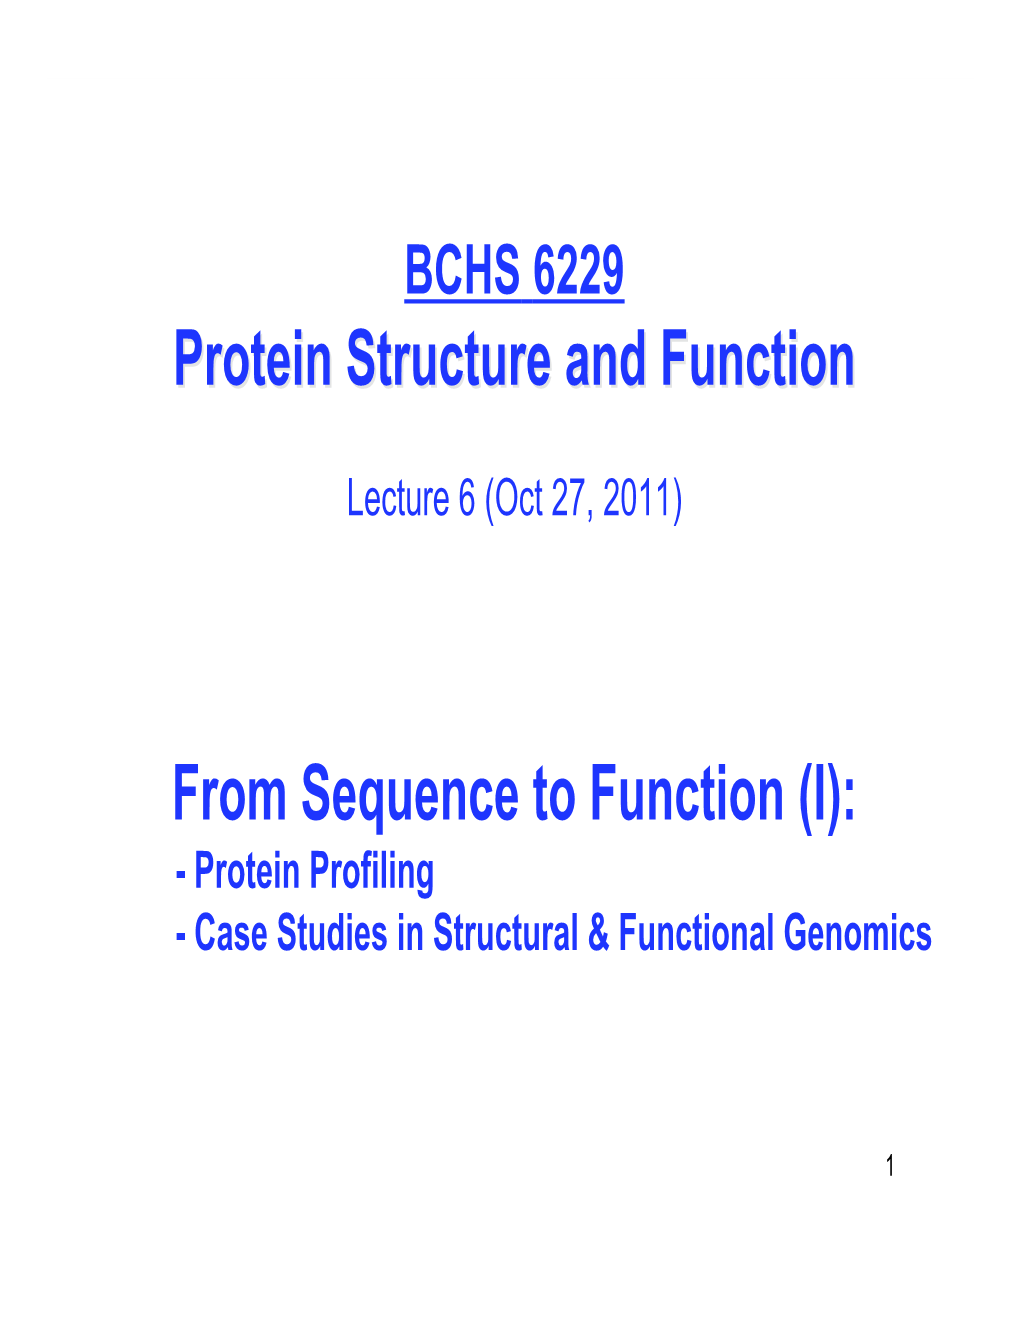 Protein Structure and Function from Sequence to Function (I)